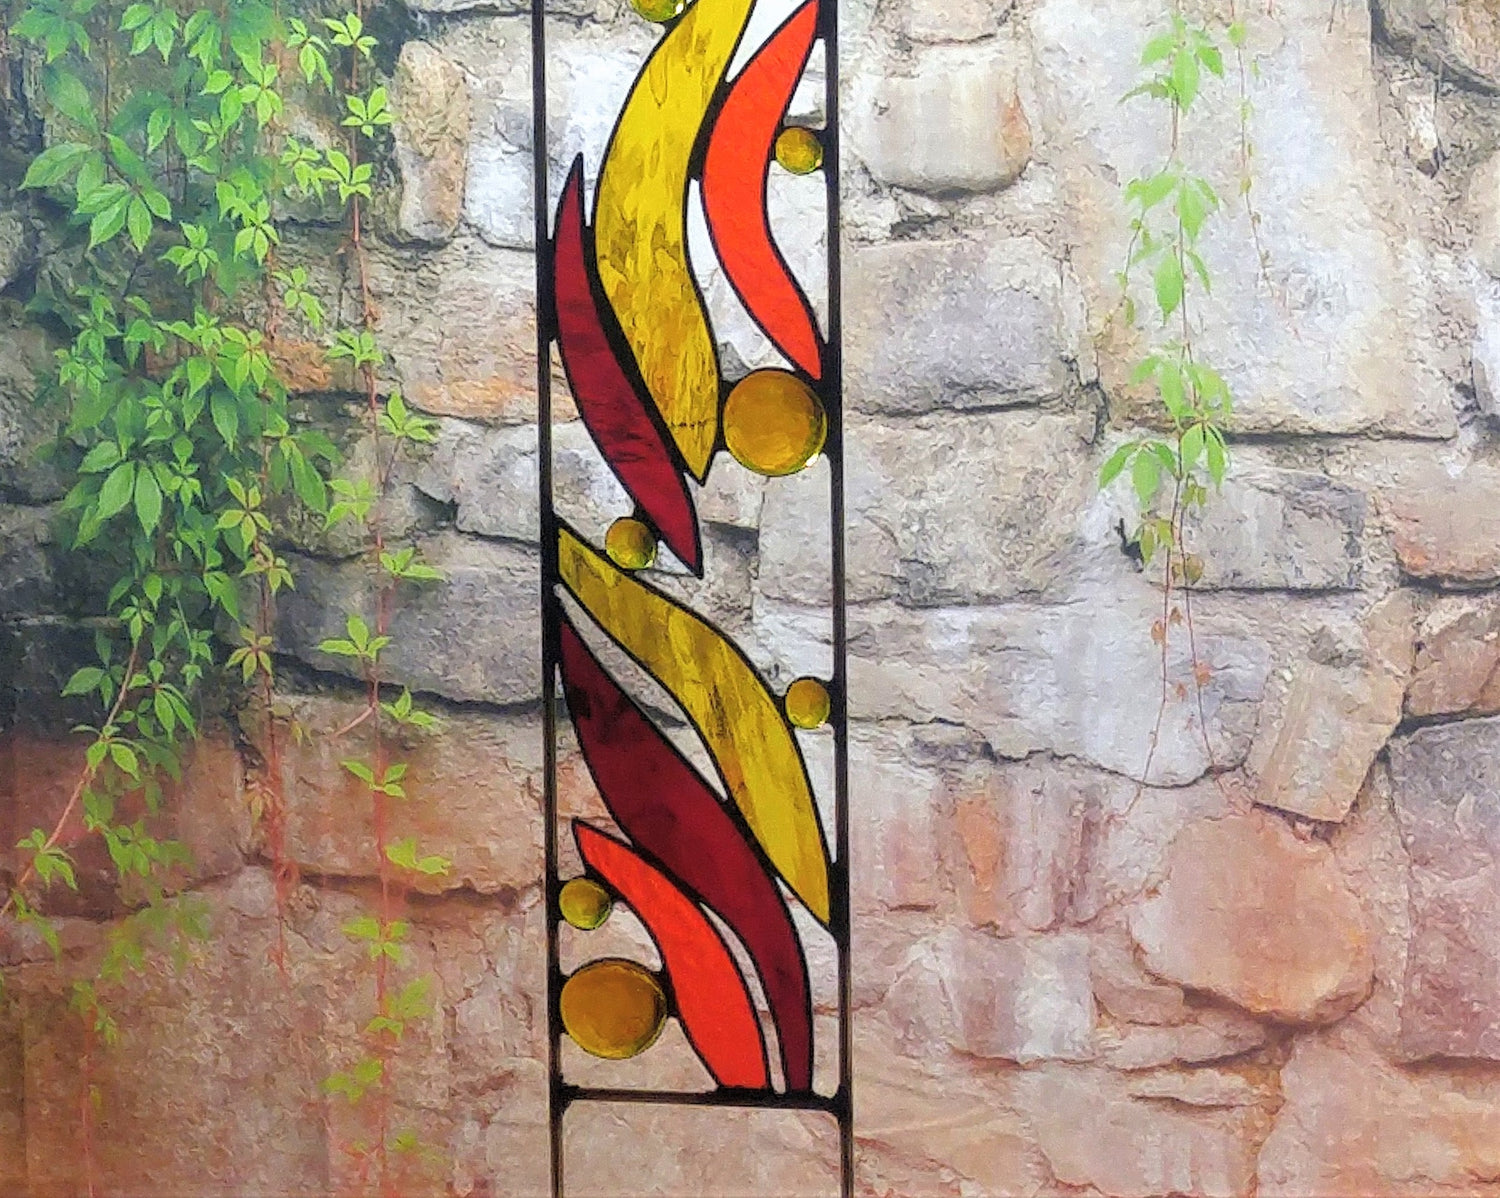 outdoor stained glass yard art by Windsong Glass Studio